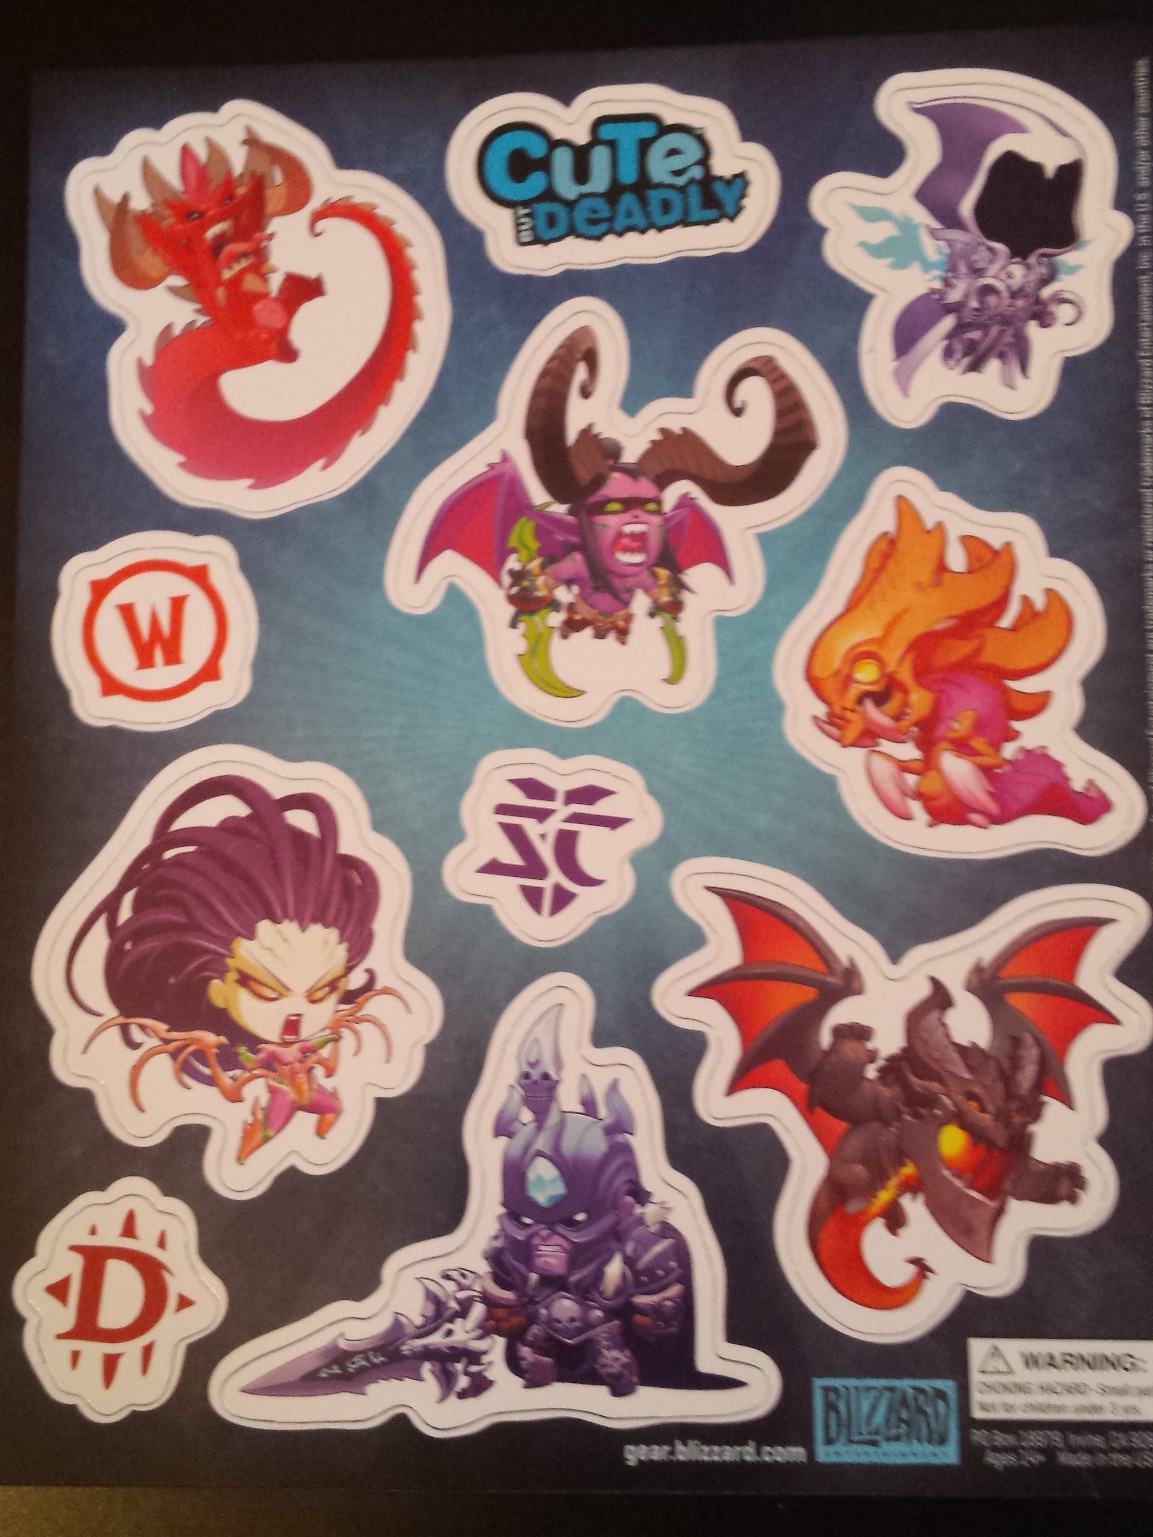 Cute but deadly blizzard stickers, loot crate, loot crate review, november loot crate, unboxing